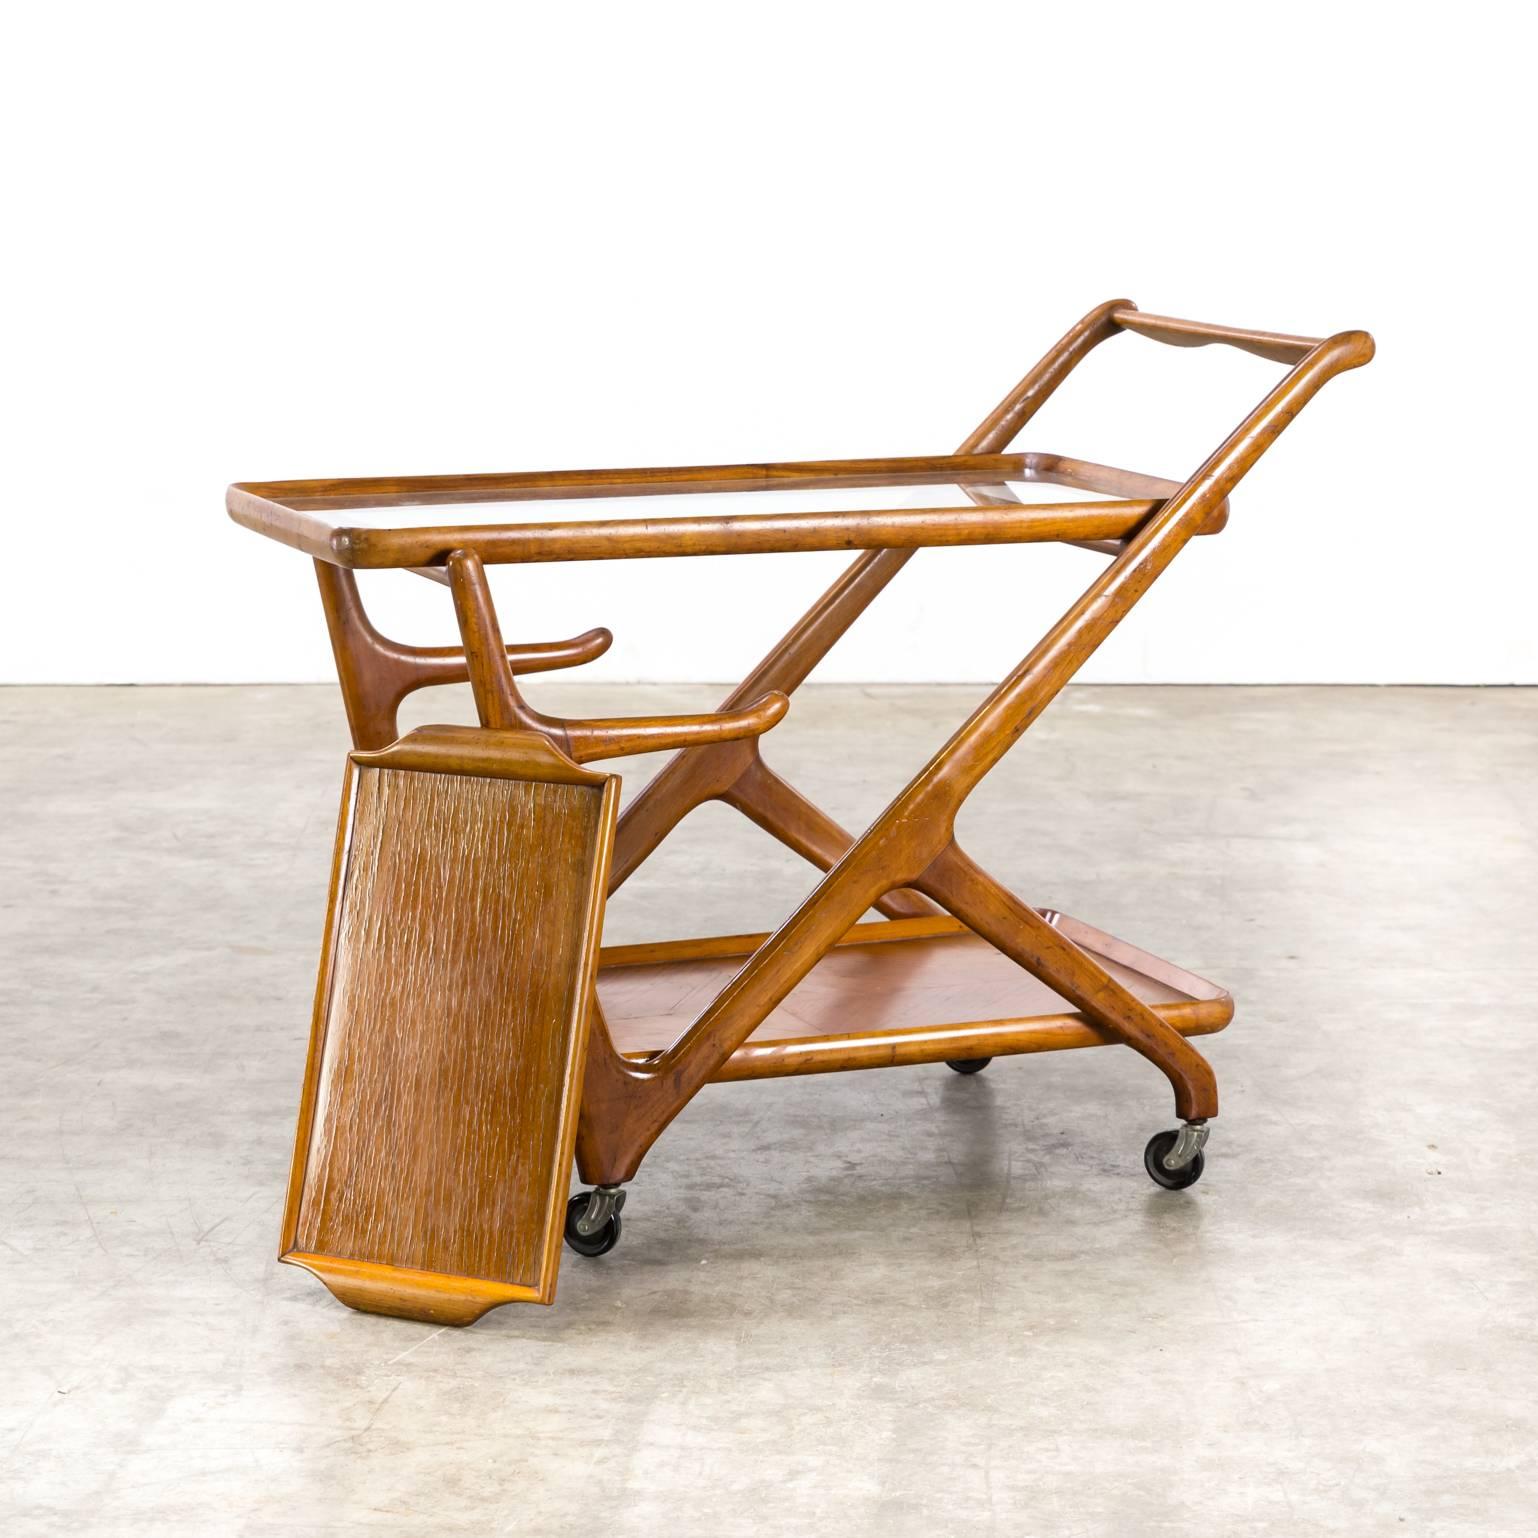 1950s Cesare Lacca tea trolley for Cassina. Good condition with characteristic spurs of aging, consistent with age and use.